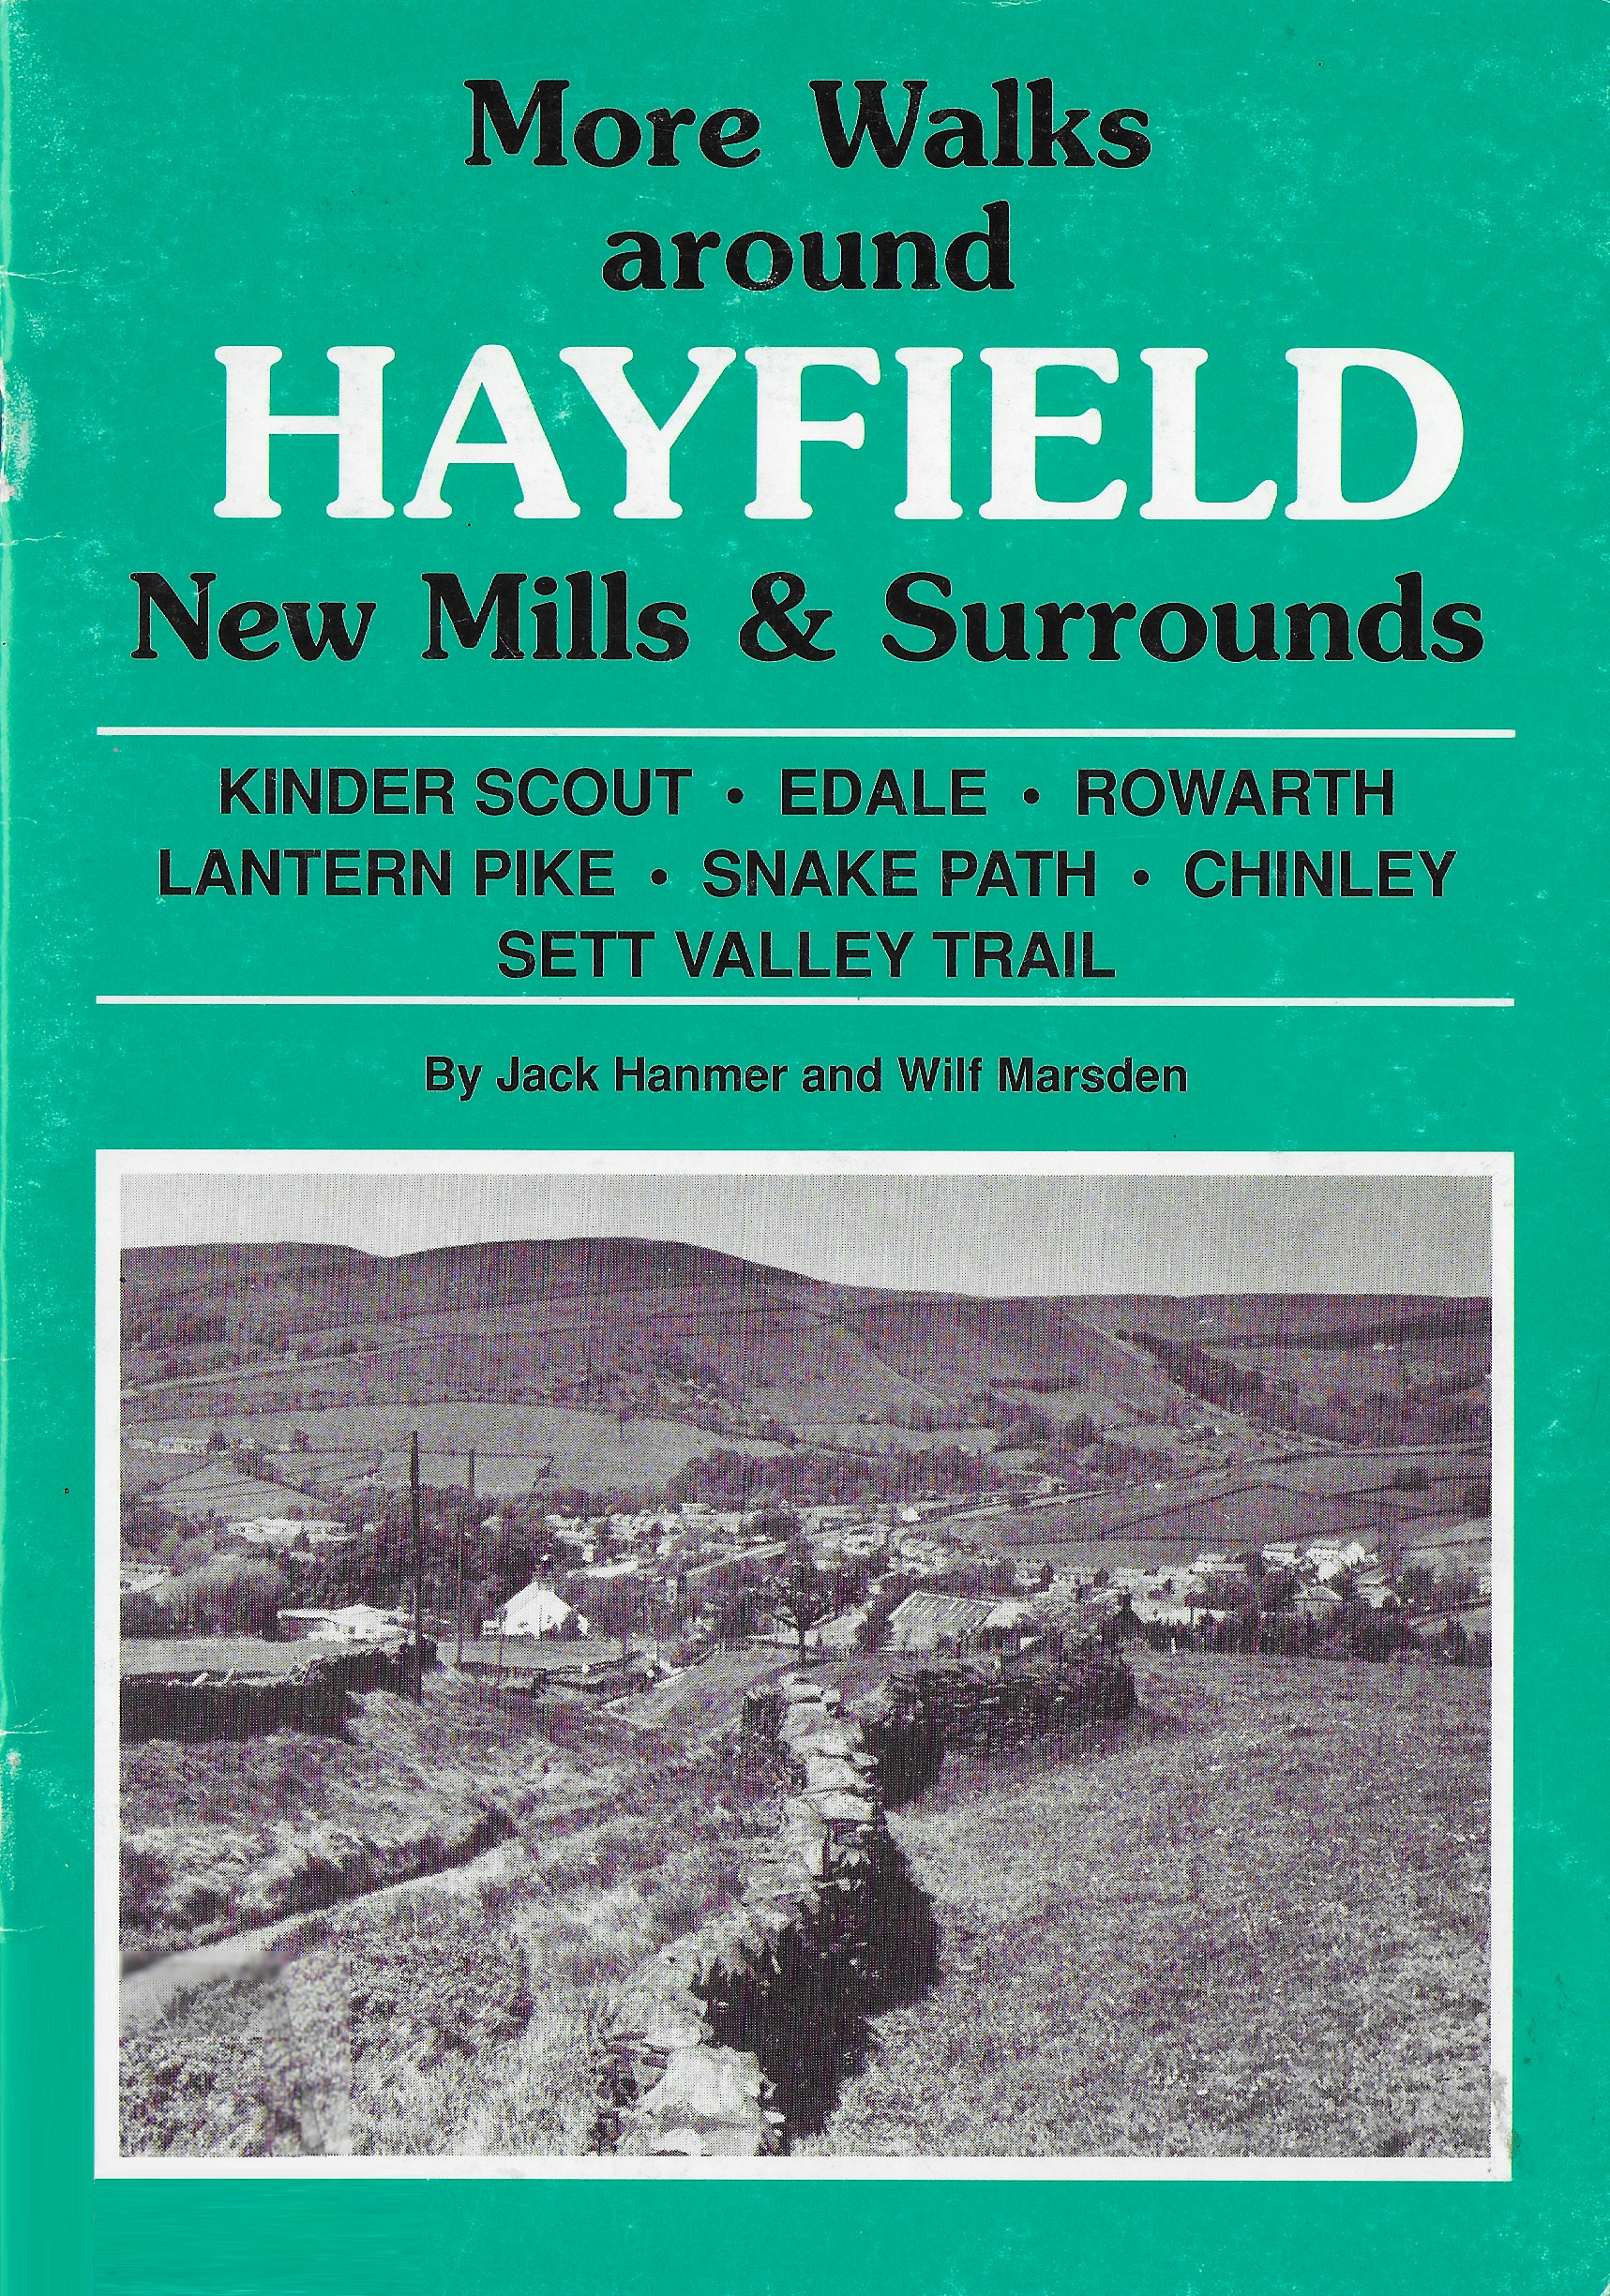 More Walks around Hayfield, New Mills and Surrounds